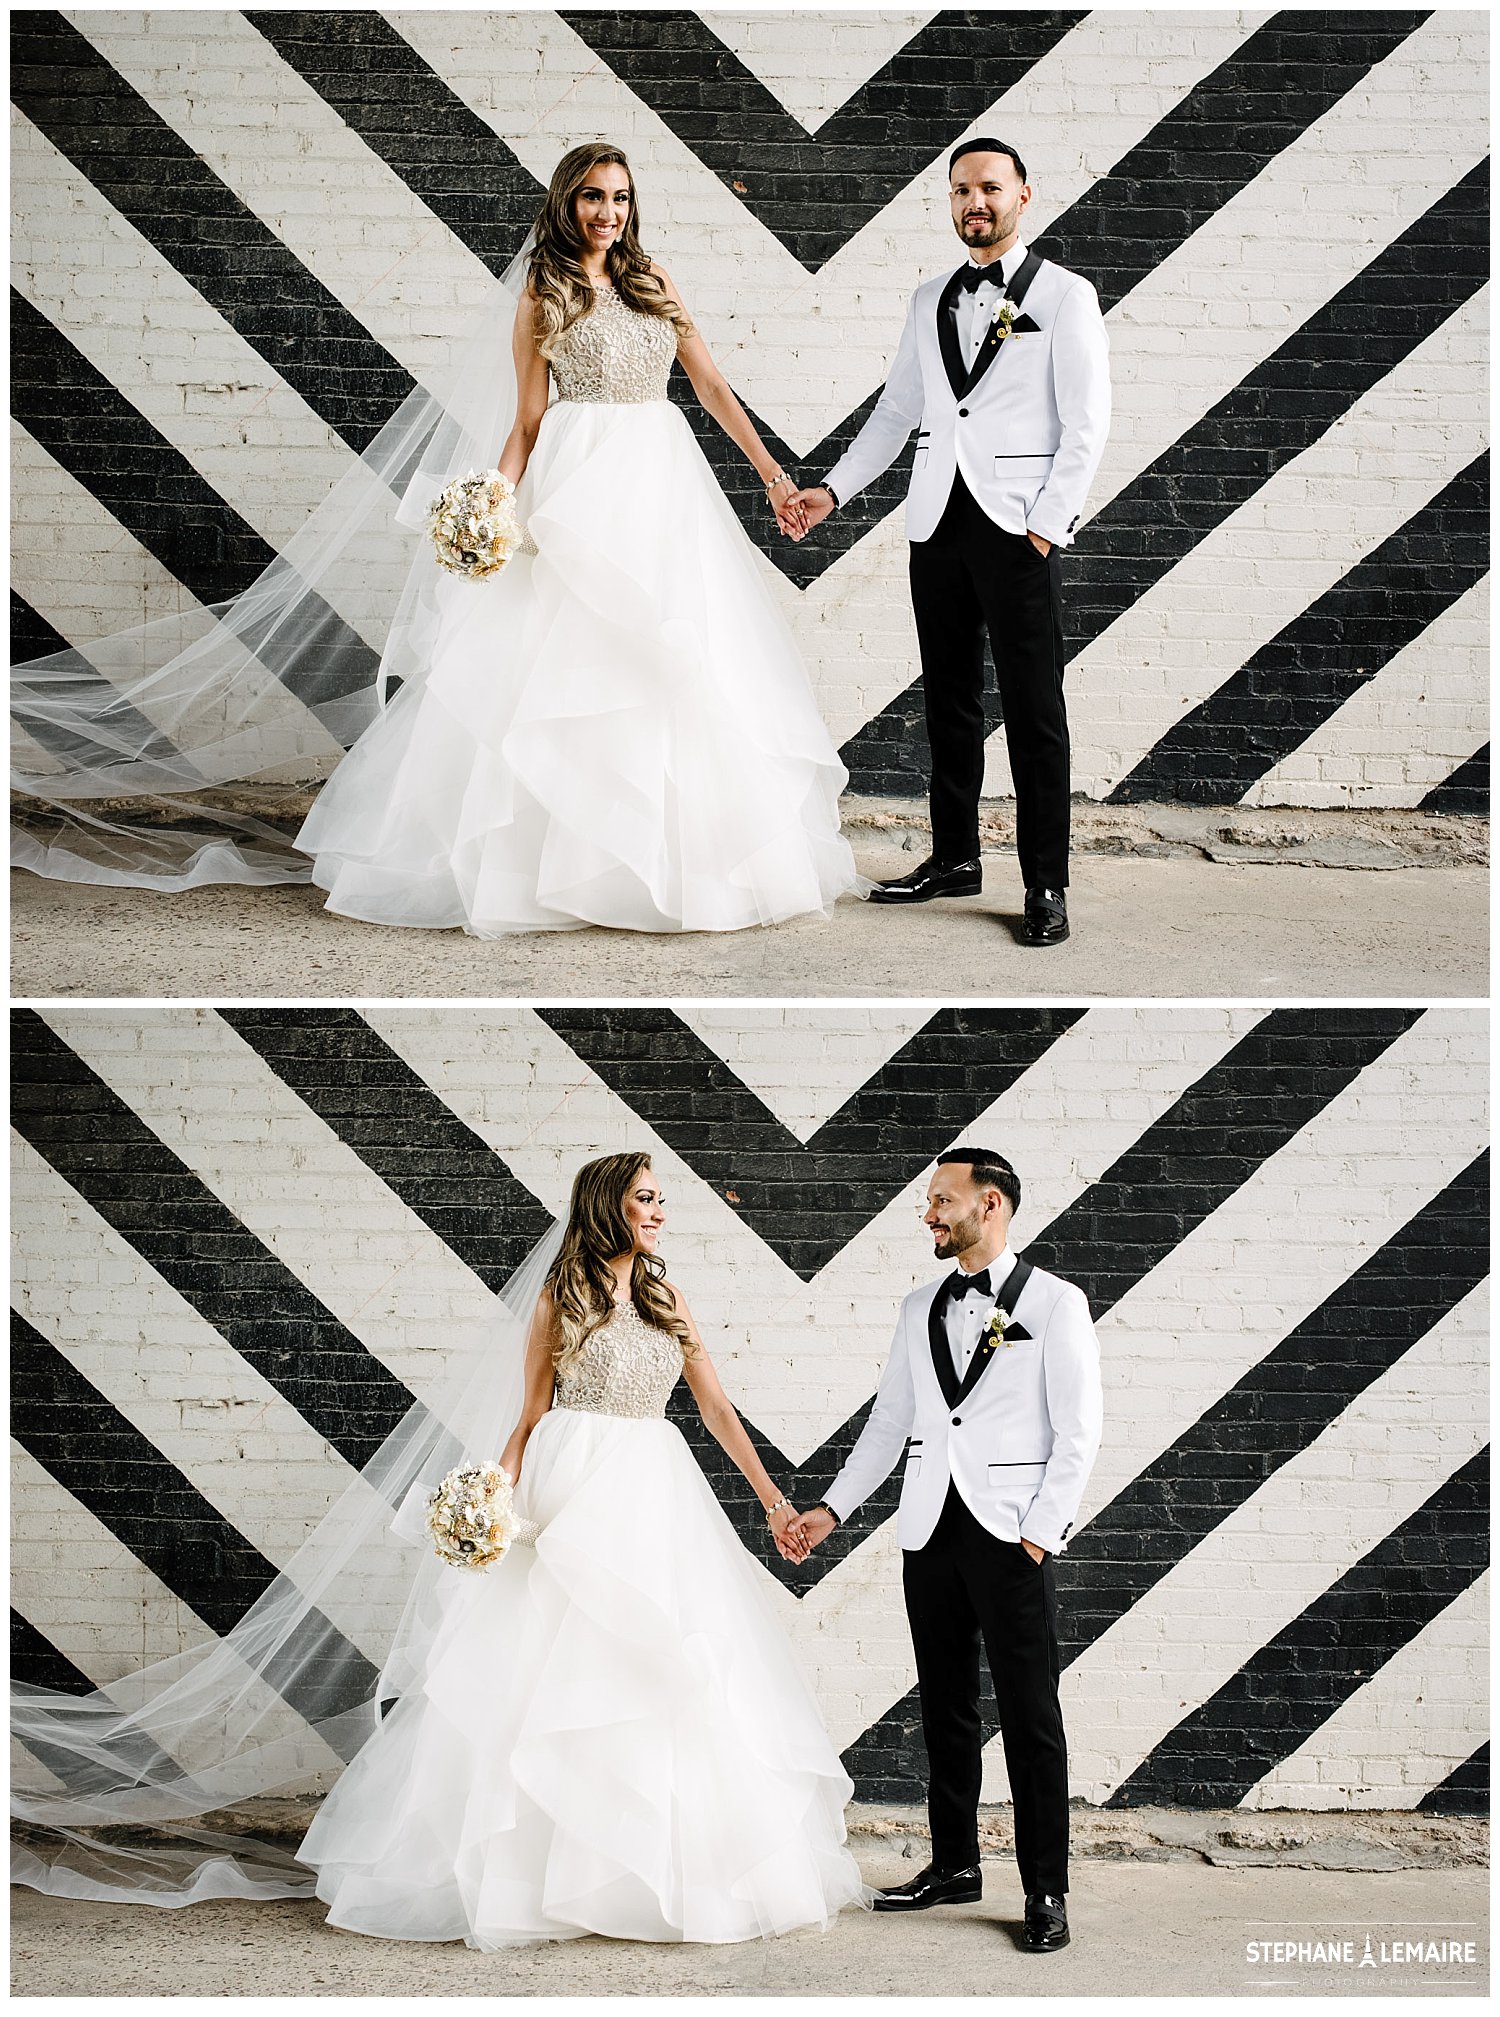 Wedding photo at Epic Railyard in El Paso Texas by Stephane Lemaire photography